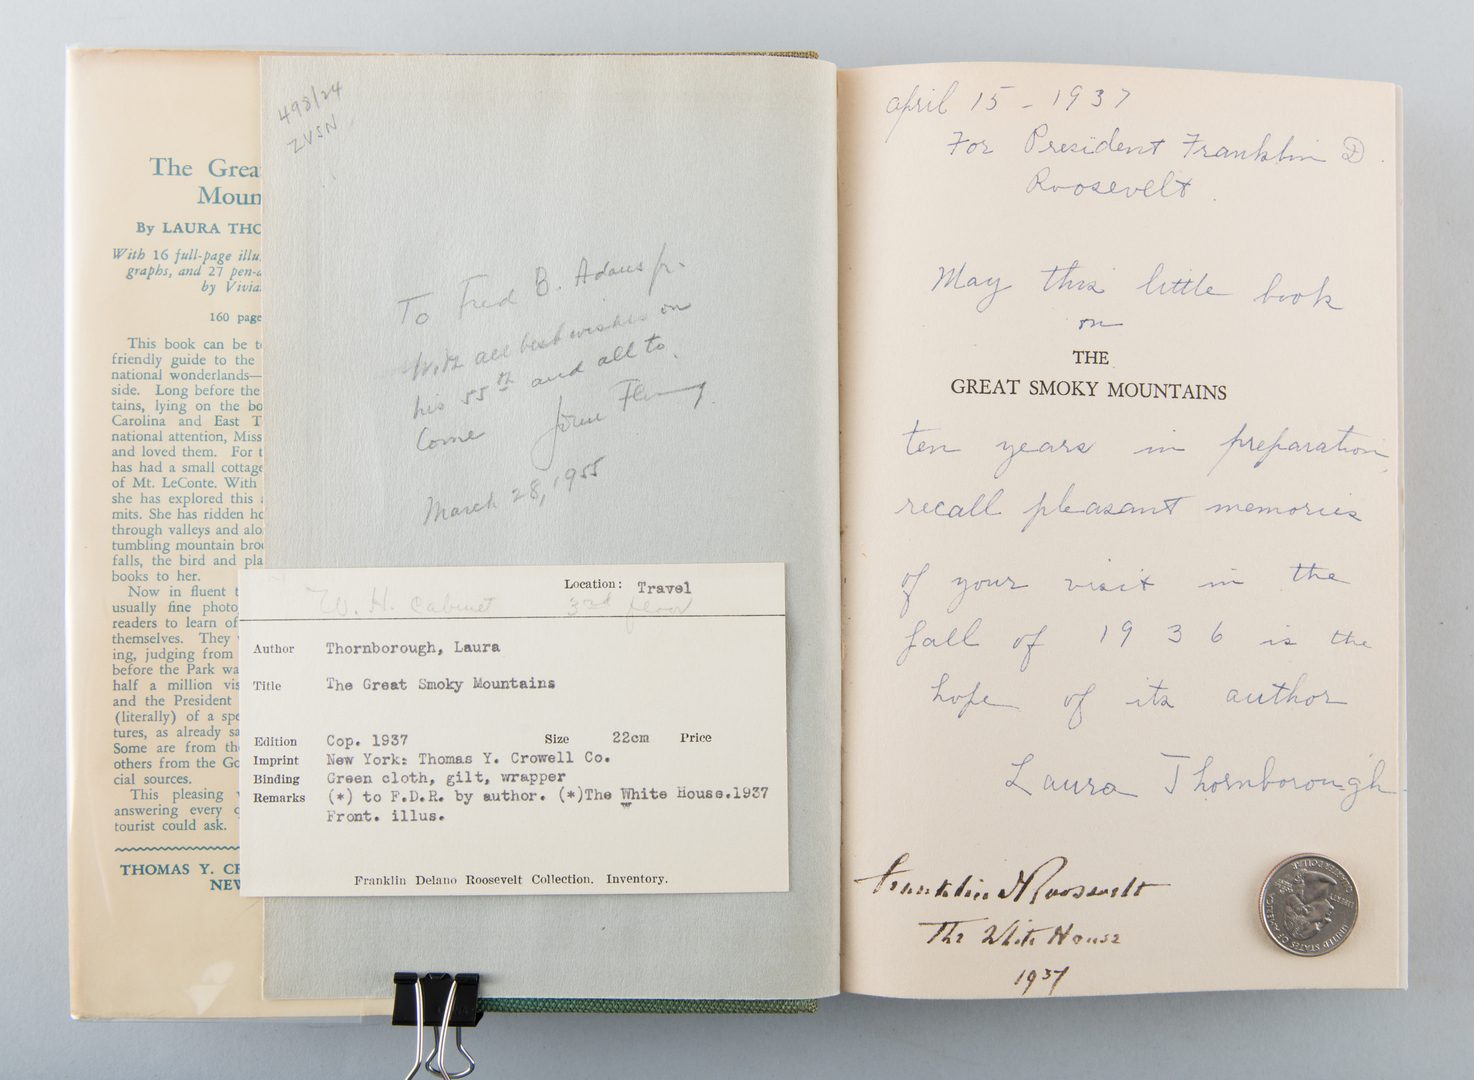 Lot 192: FDR's Copy of "The Great Smoky Mountains"